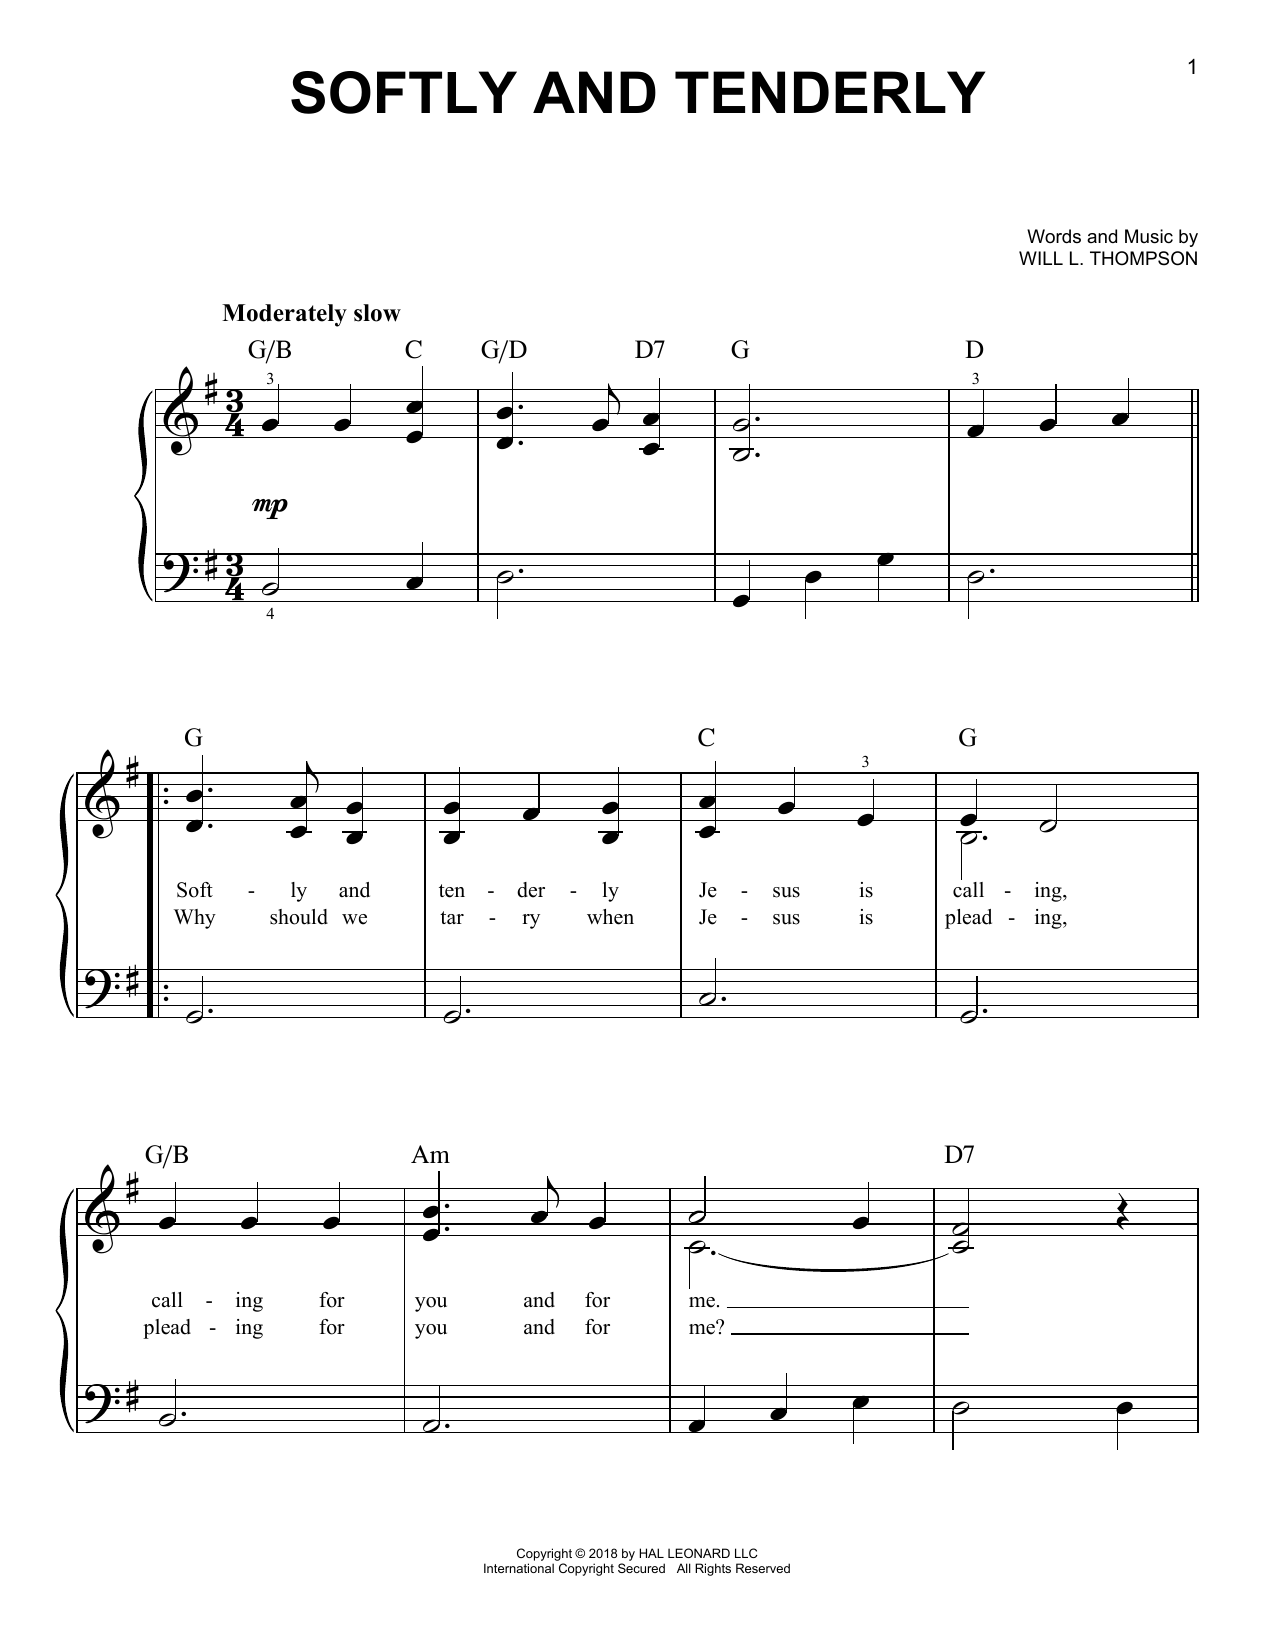 Download Will L. Thompson Softly And Tenderly Sheet Music